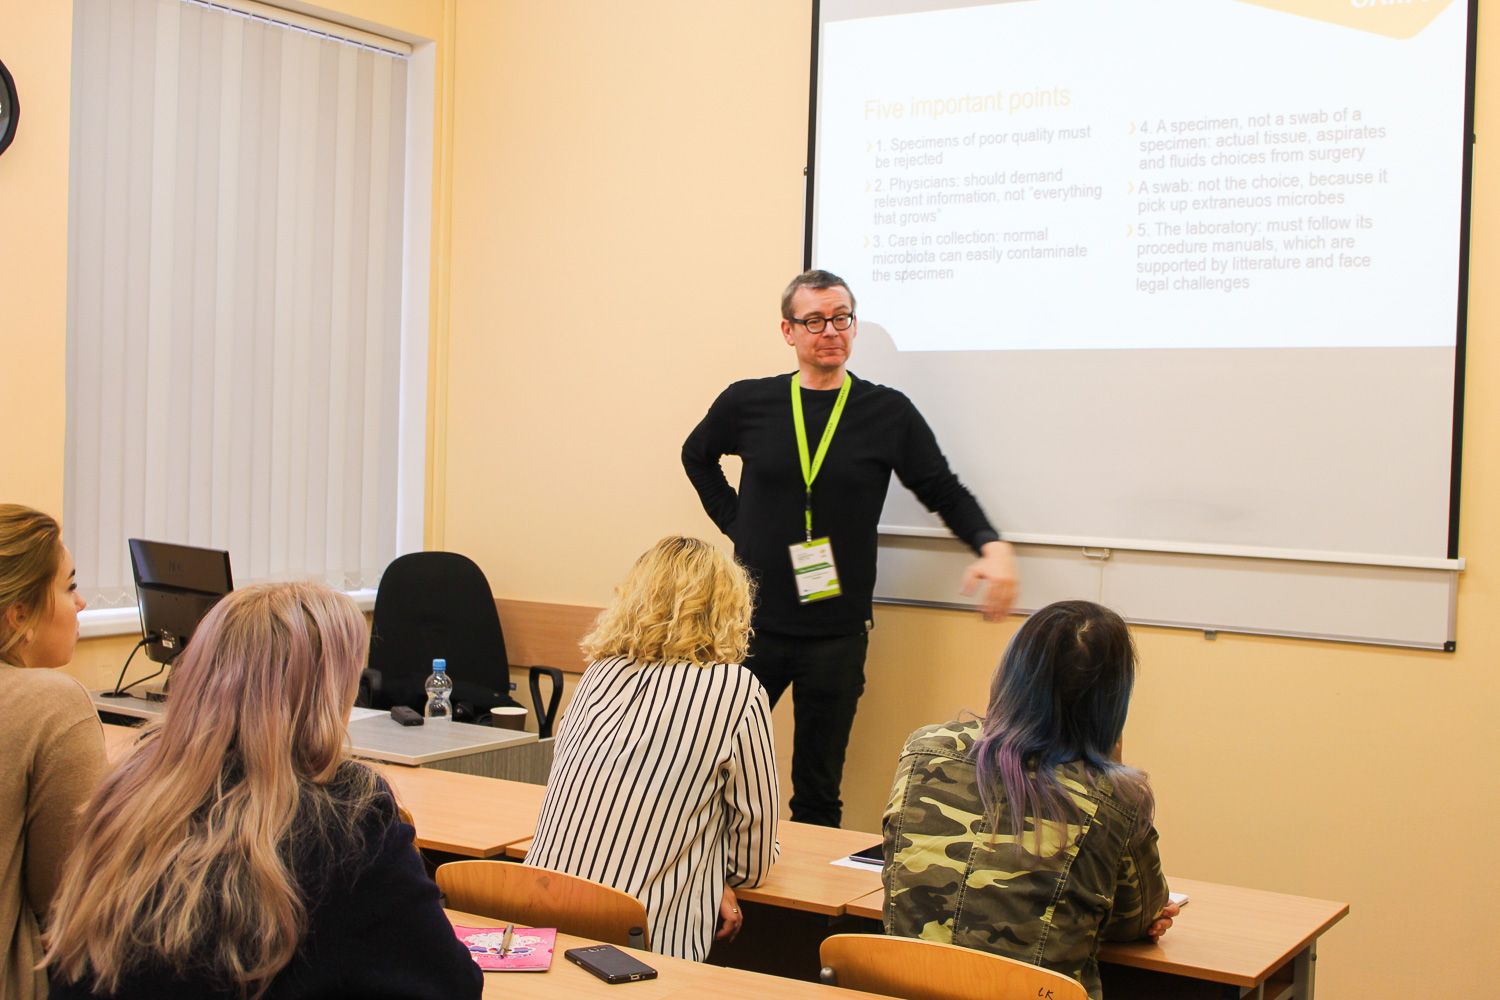 The 1st International week at P. Stradins Medical College of the University of Latvia 2